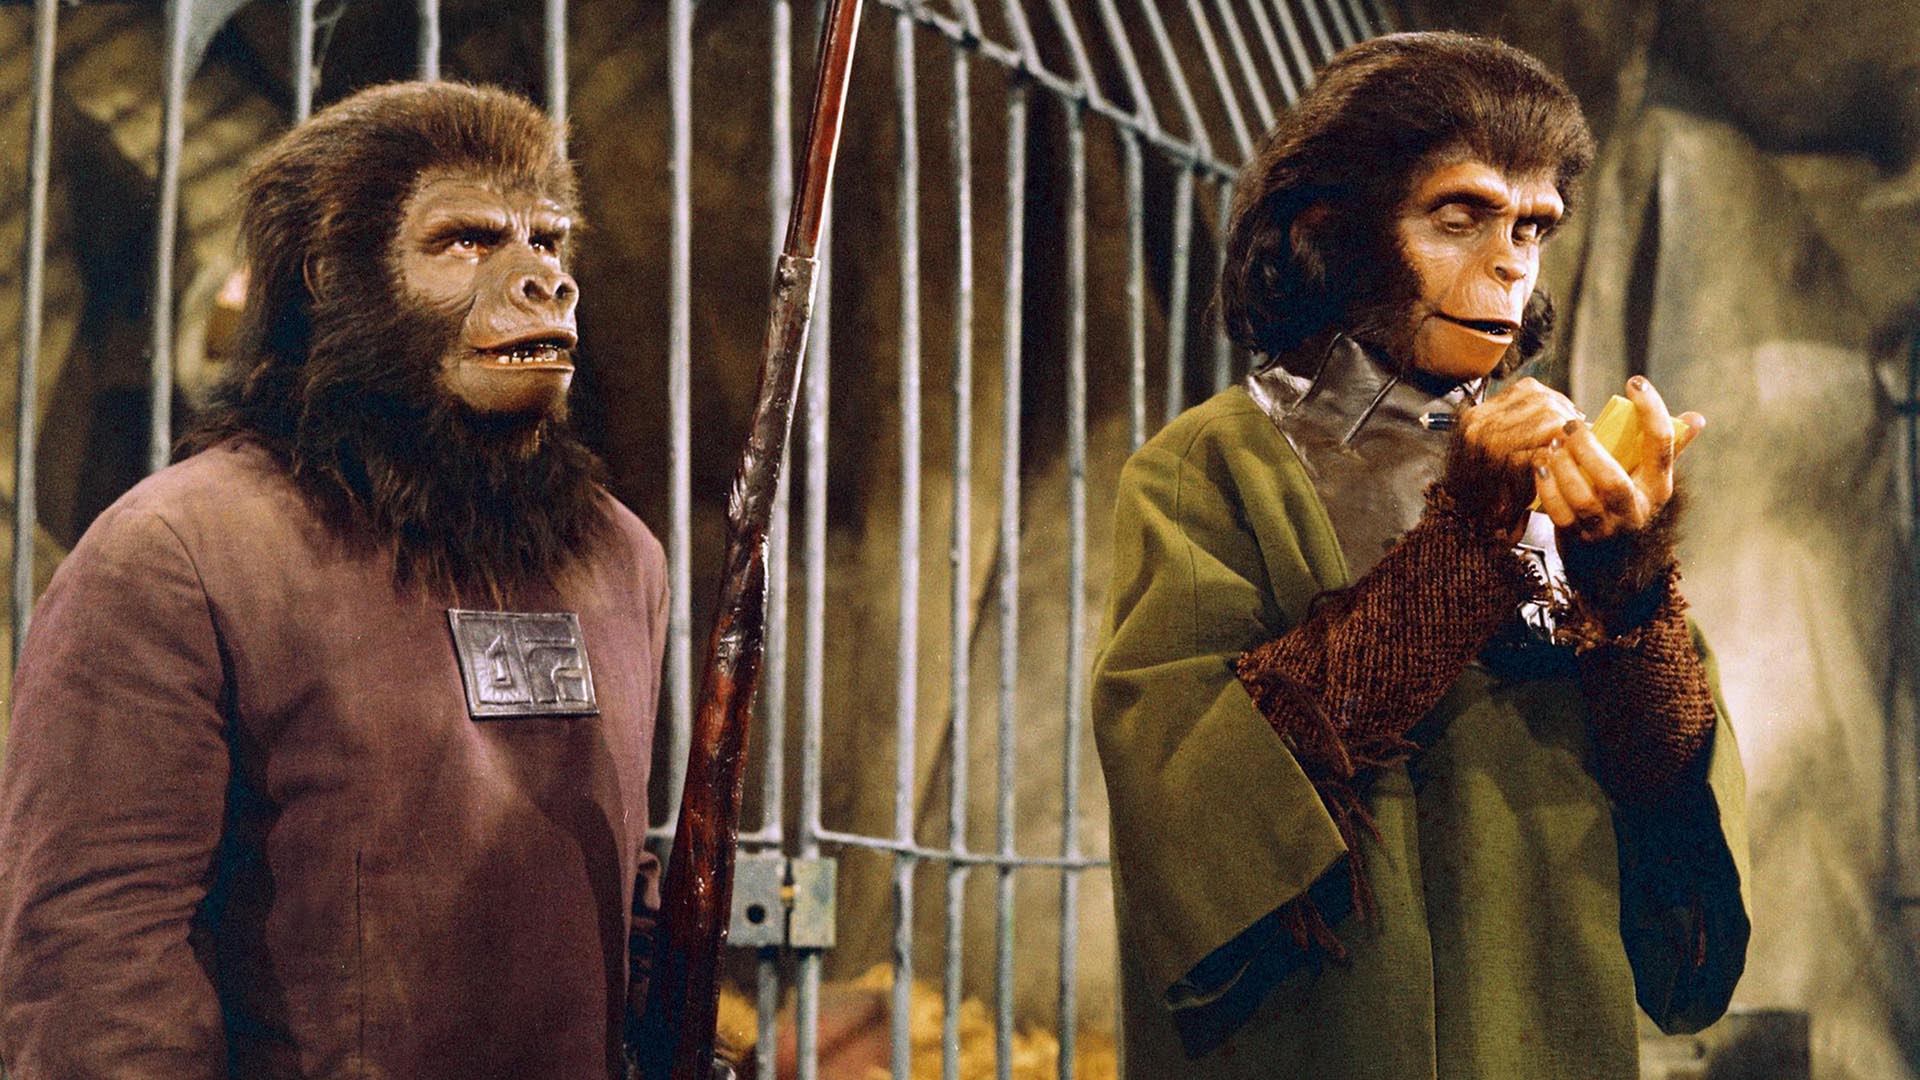 Planet of the Apes, 1968 film was the first production in history 